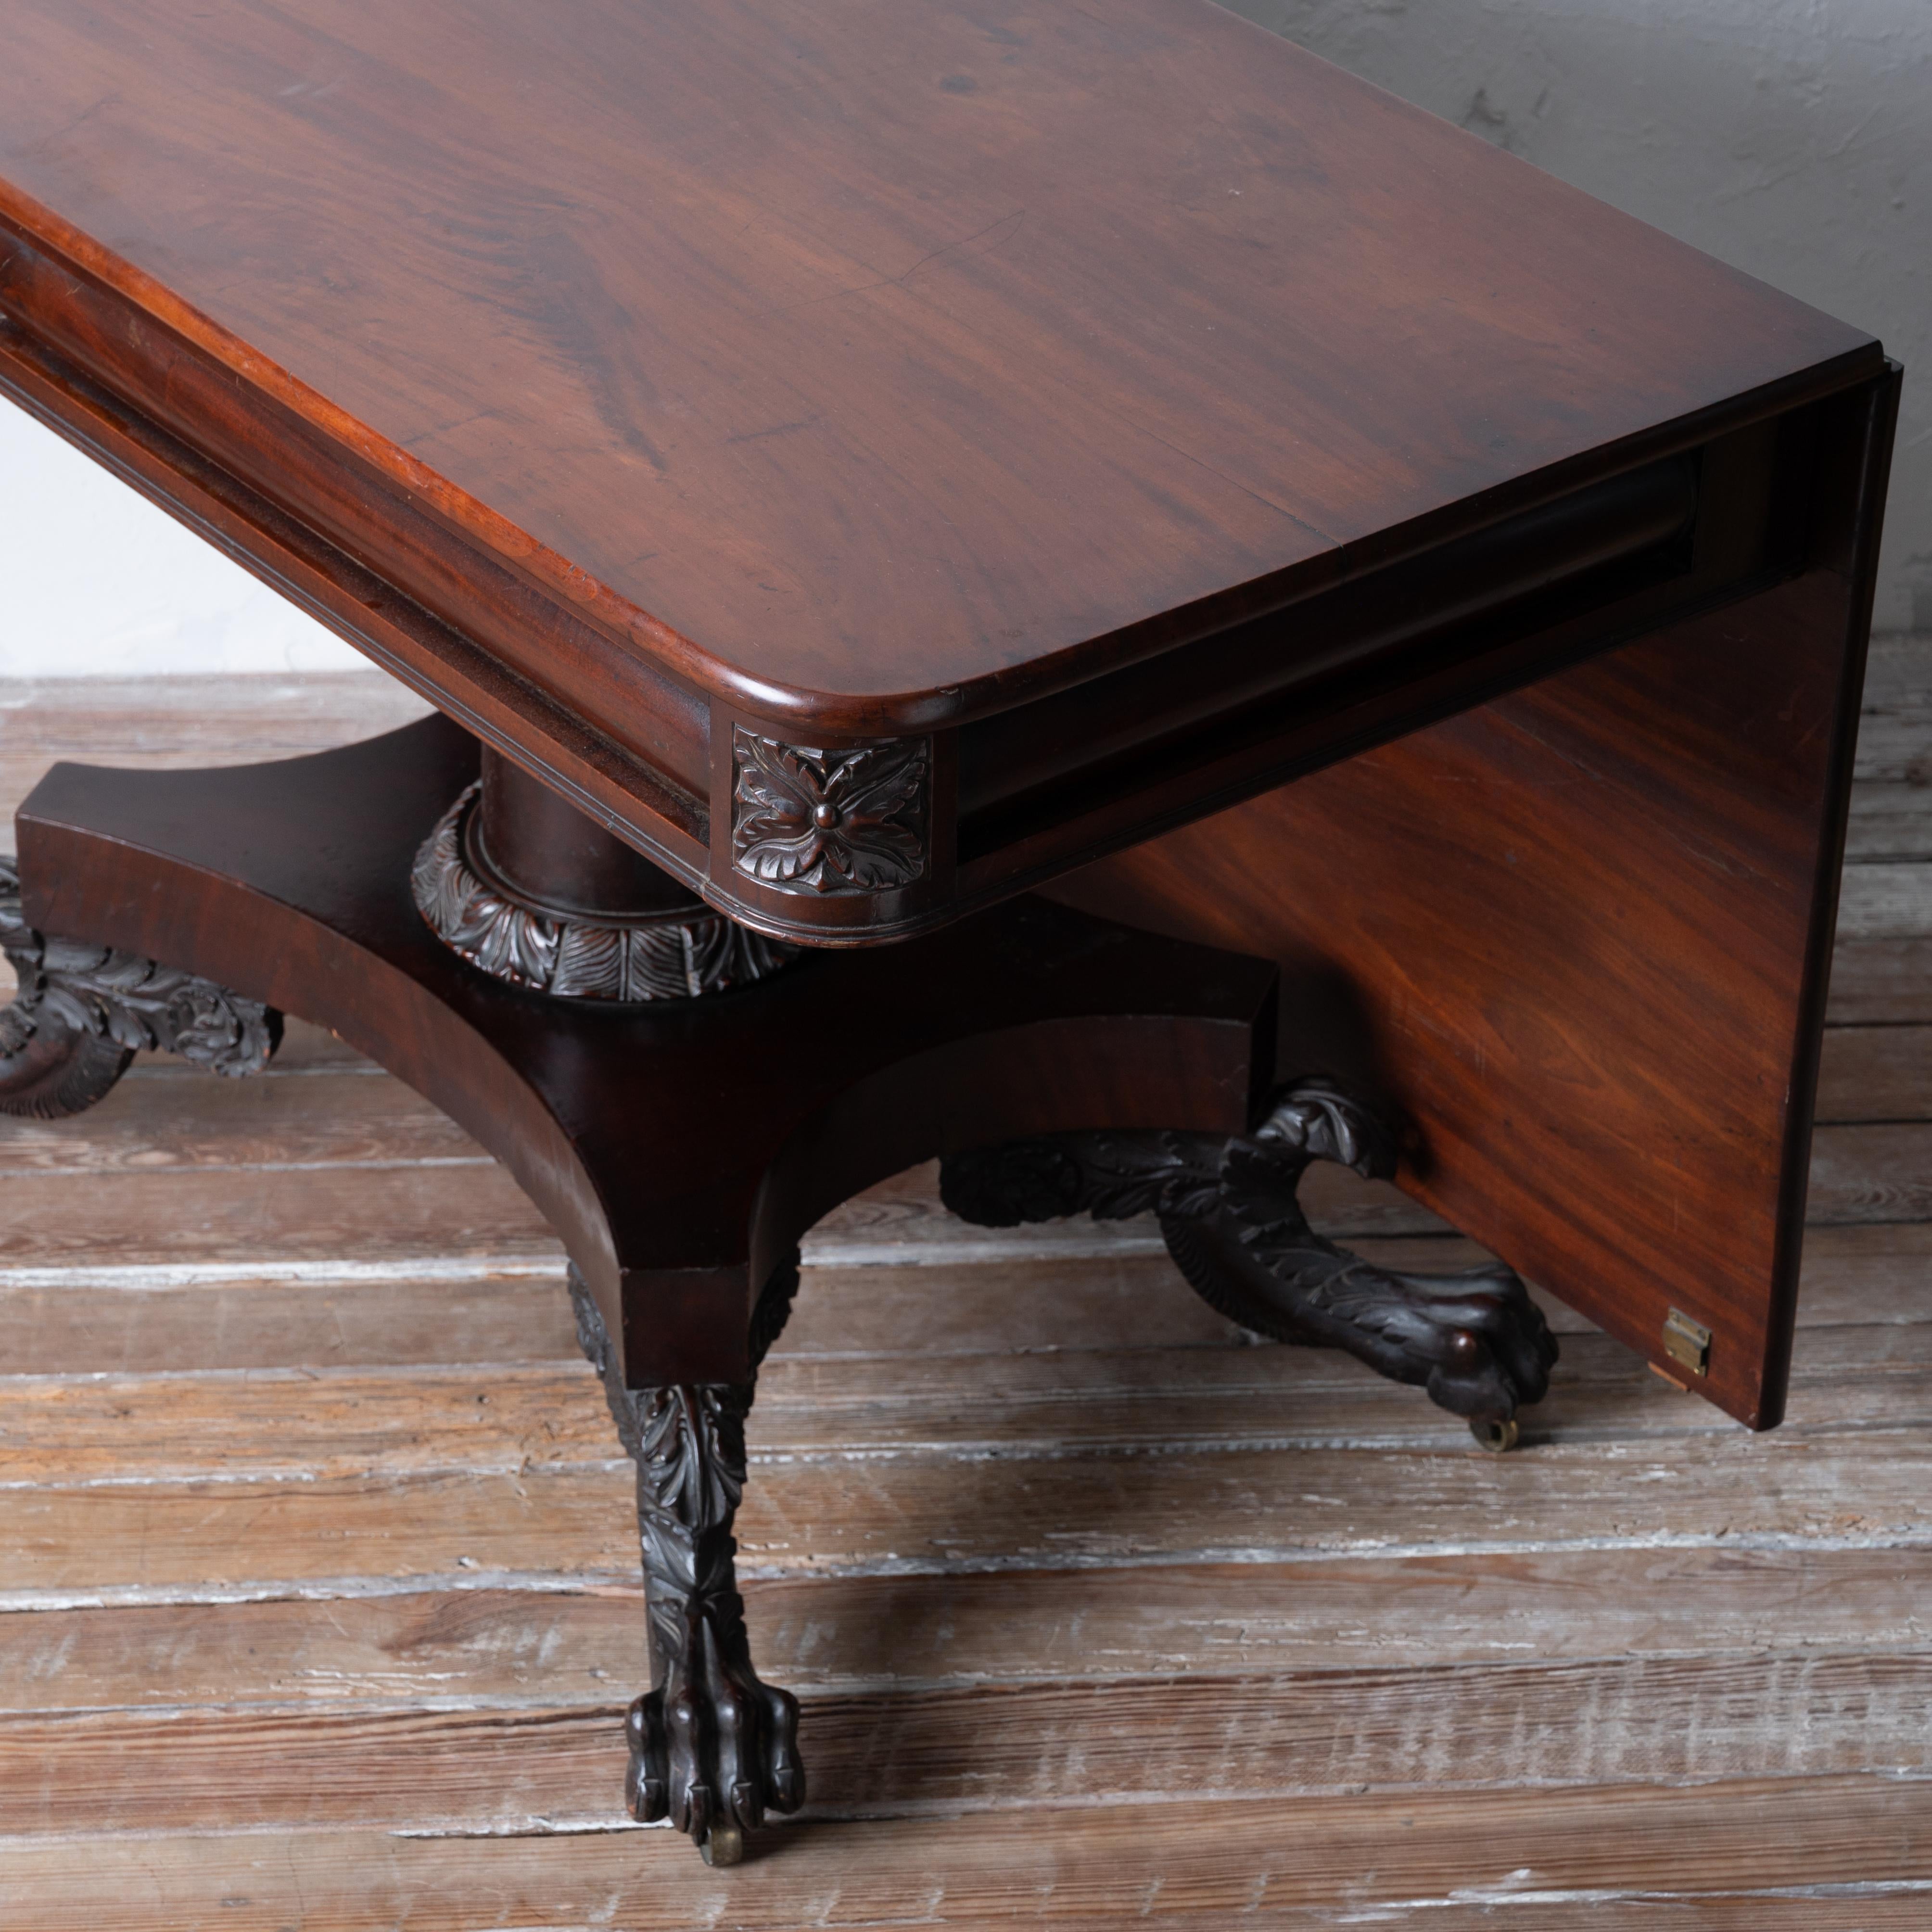 Wood Mahogany Two-Part Dining Table, Philadelphia, c.1830 For Sale